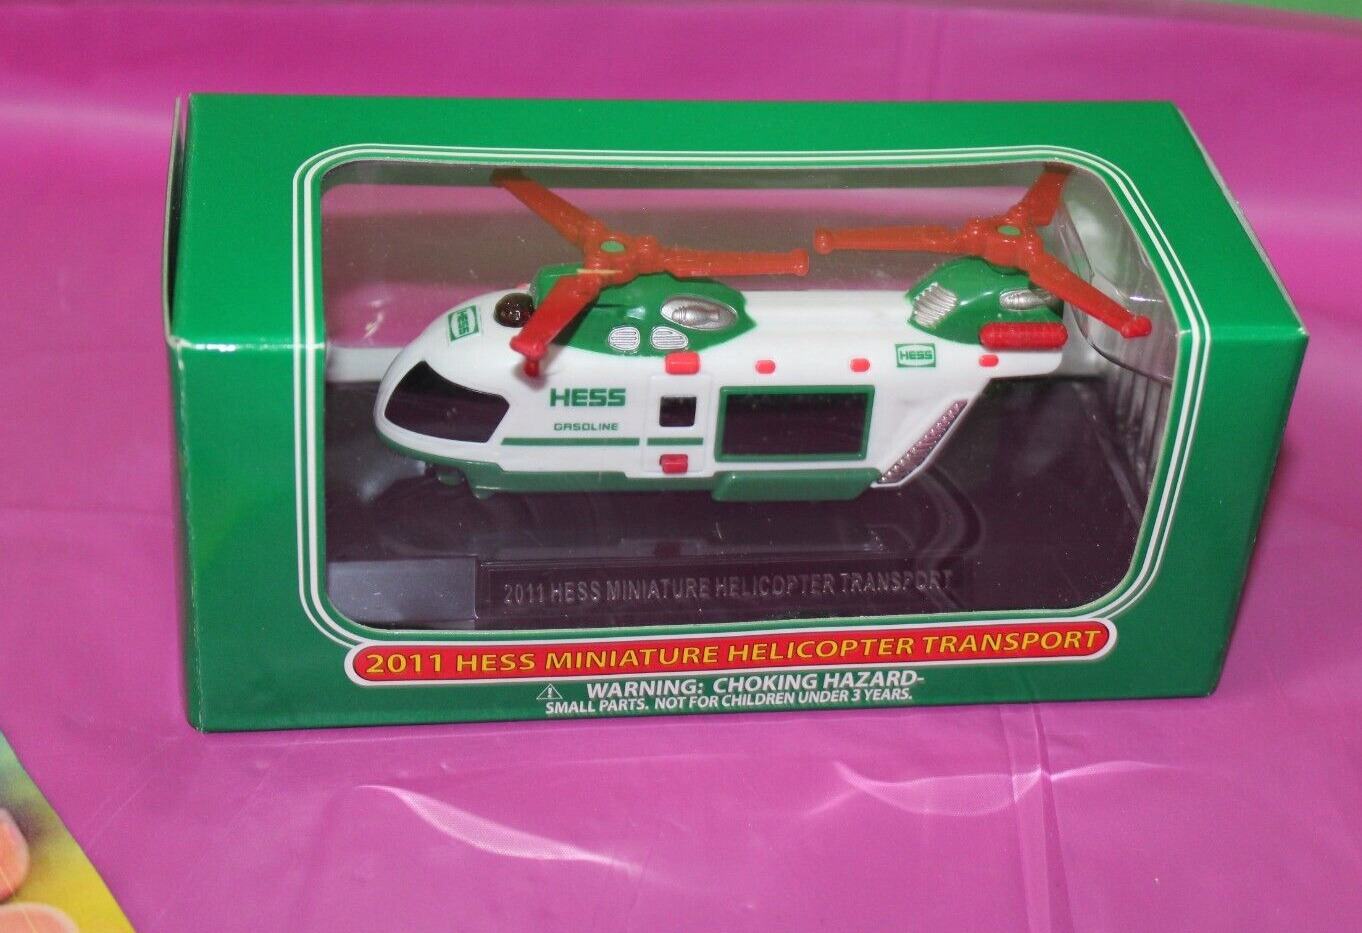 Hess 2011 Miniature Helicopter Transport Holiday Toy Christmas Gift In Box